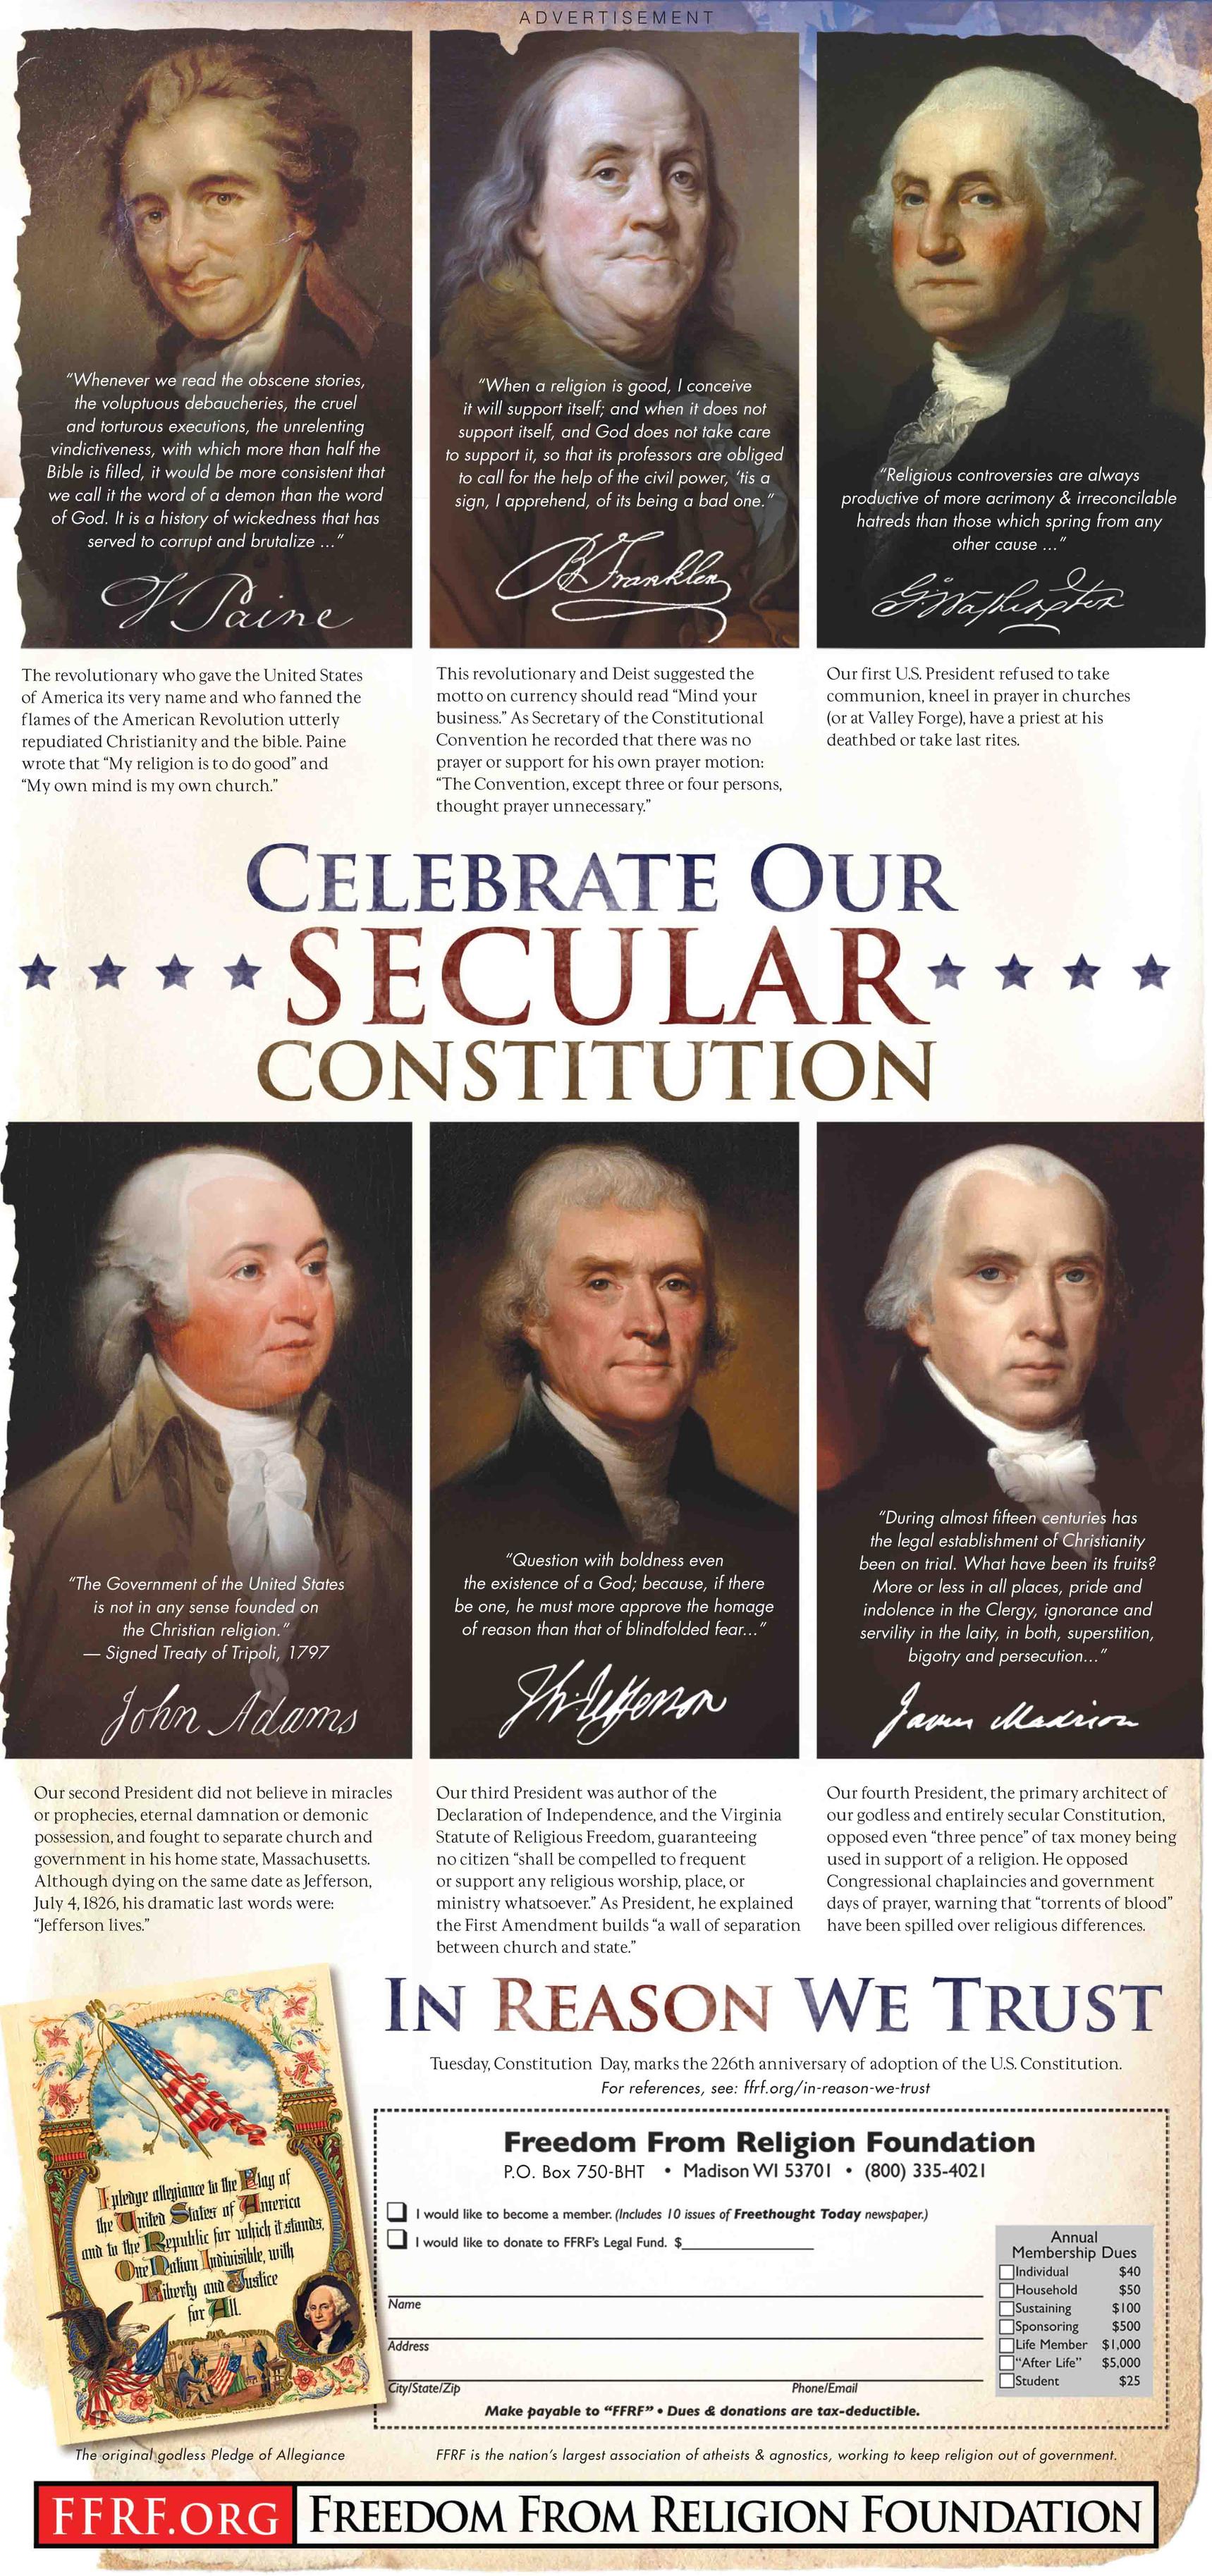 FFRF’s ‘Celebrate Our Secular Constitution’ Ad Appears in Indiana Newspaper